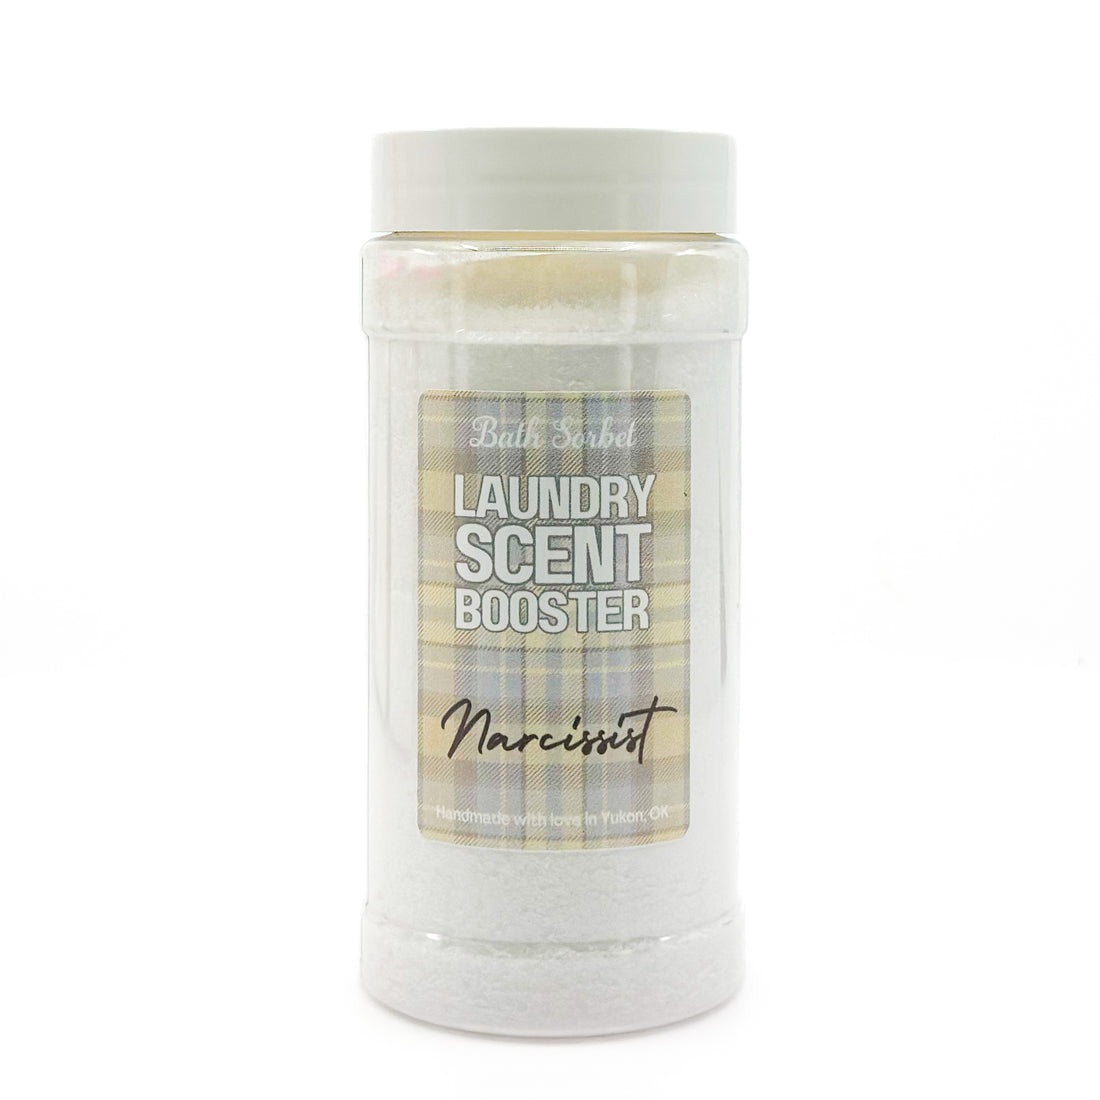 Narcissist Laundry Scent Booster